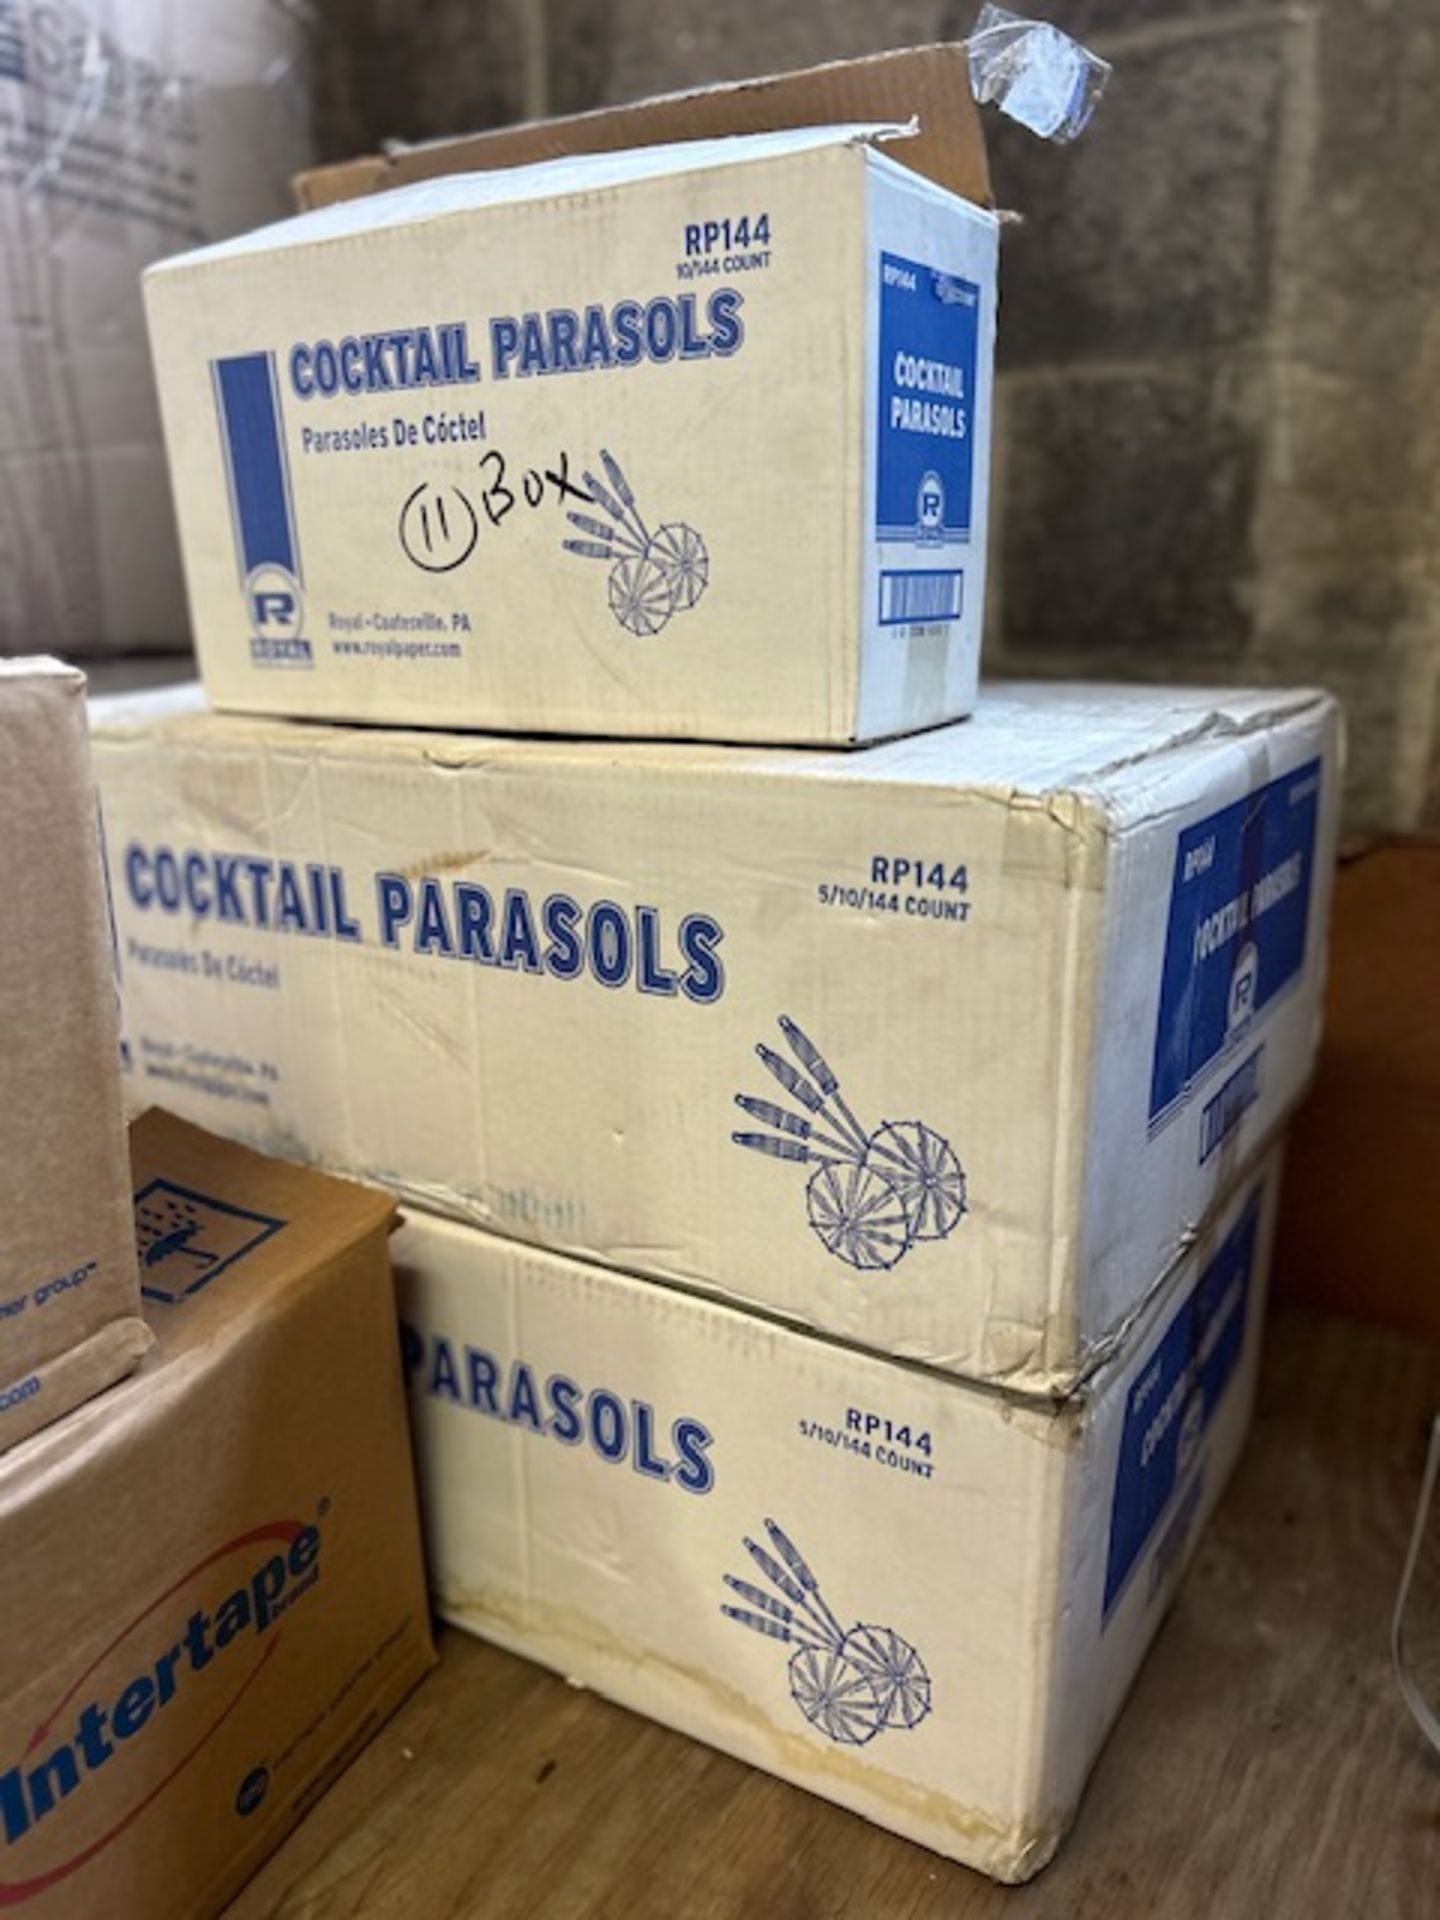 (11) Boxes - Royal Cocktail Parasols - RP144 (10/144 Count) - Image 2 of 2